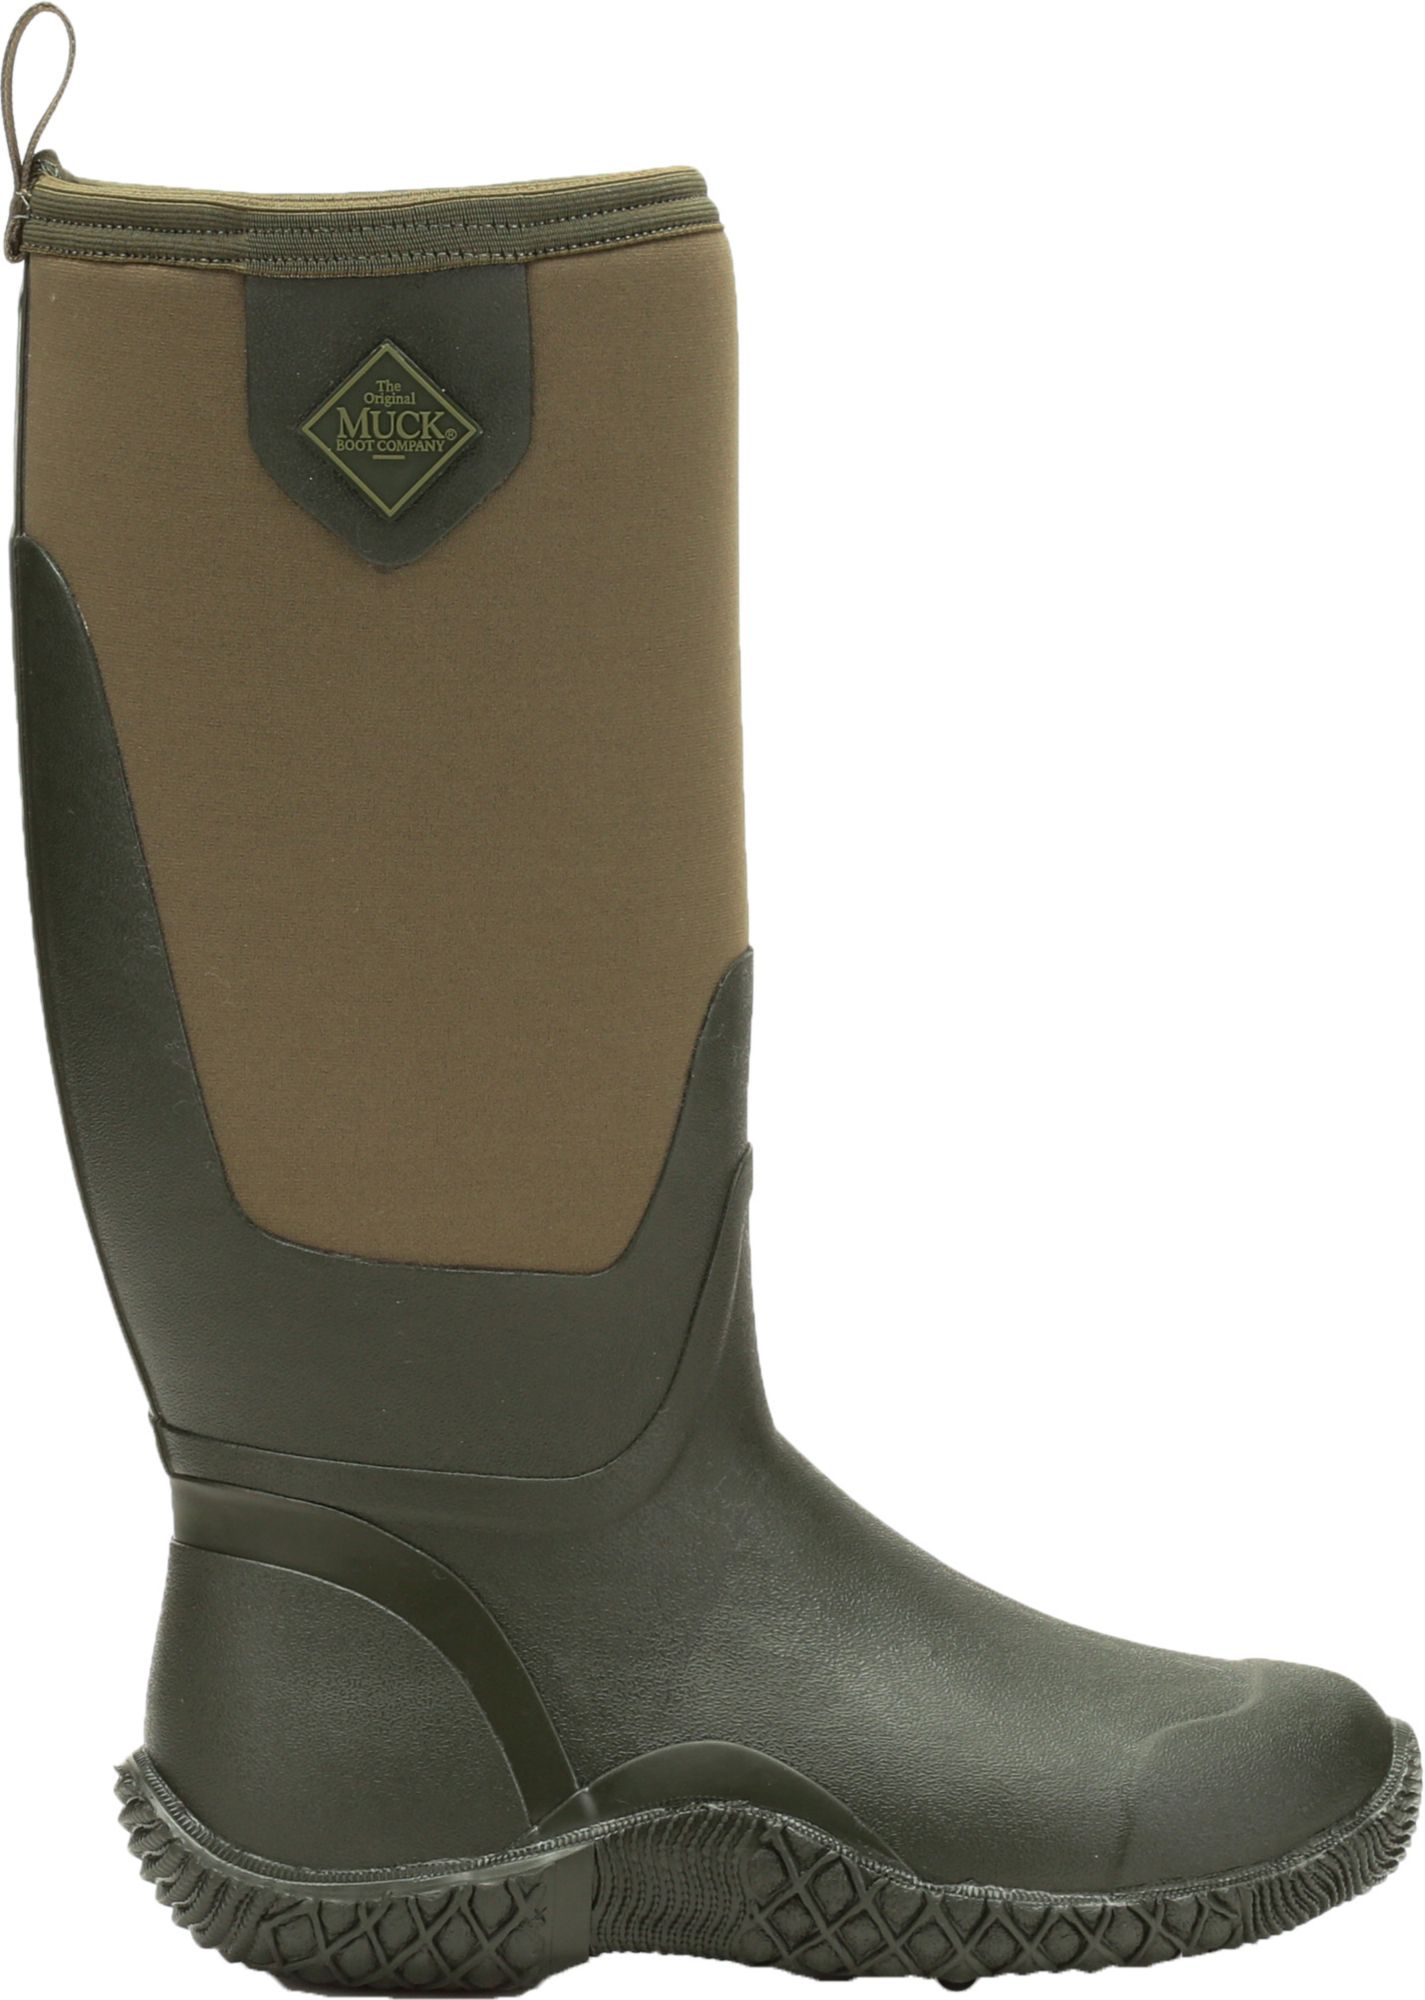 muck boots with steel shank